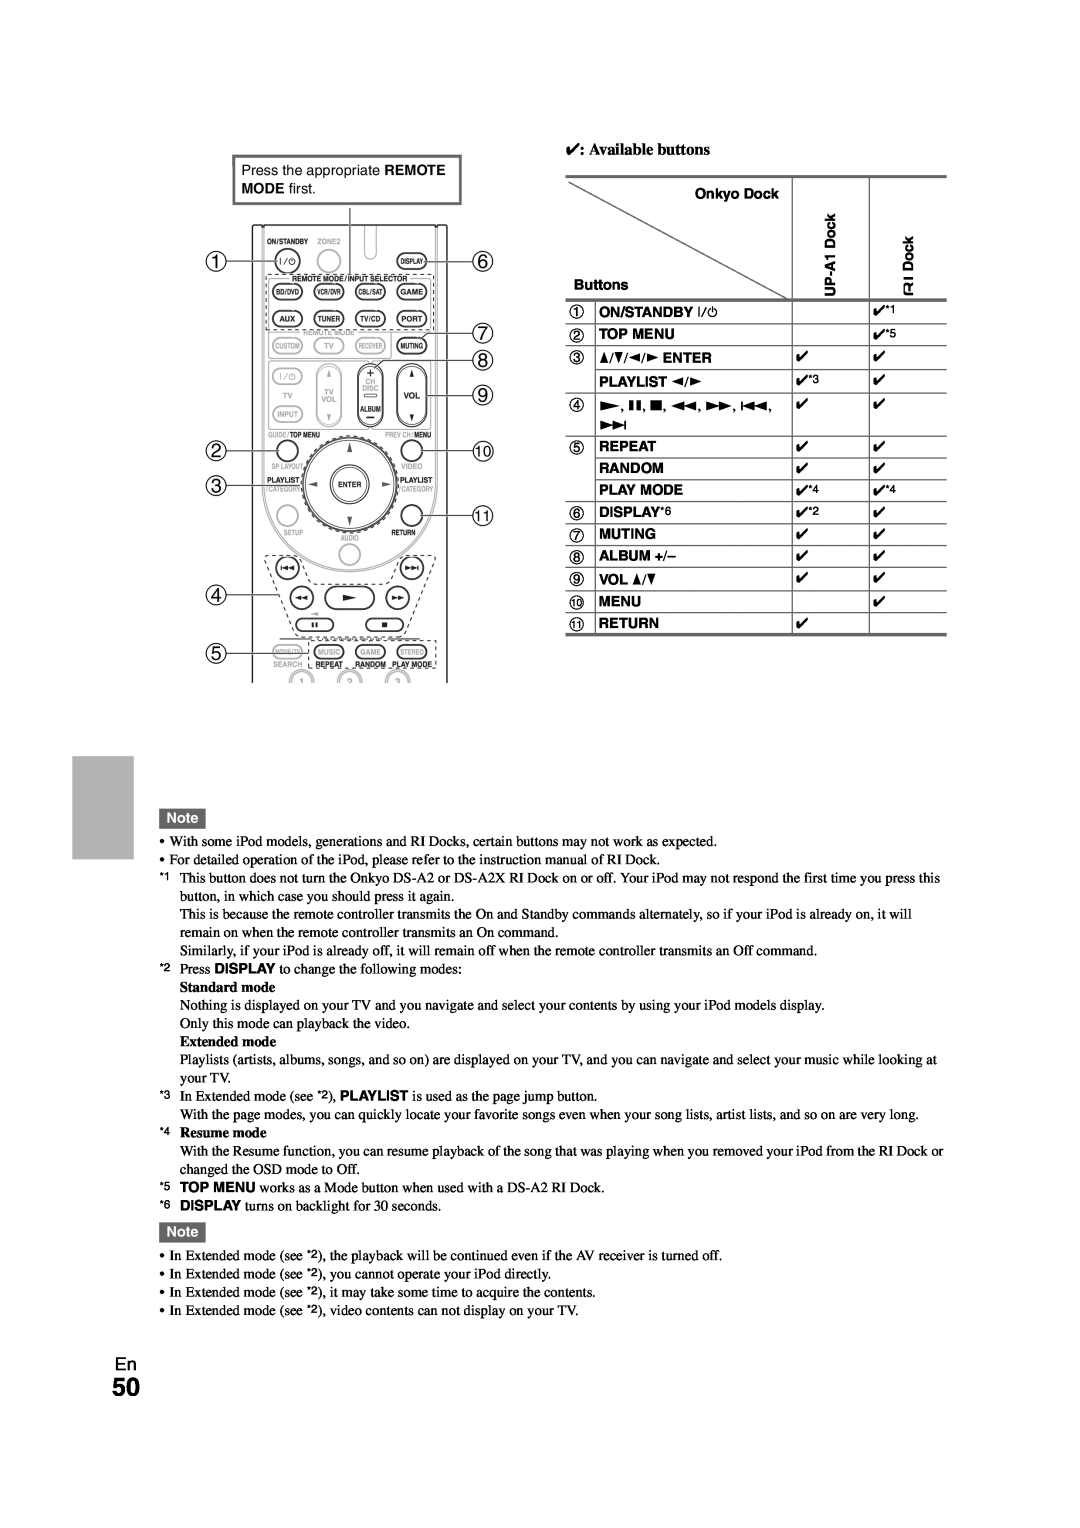 Onkyo HT-S5300 instruction manual Available buttons 